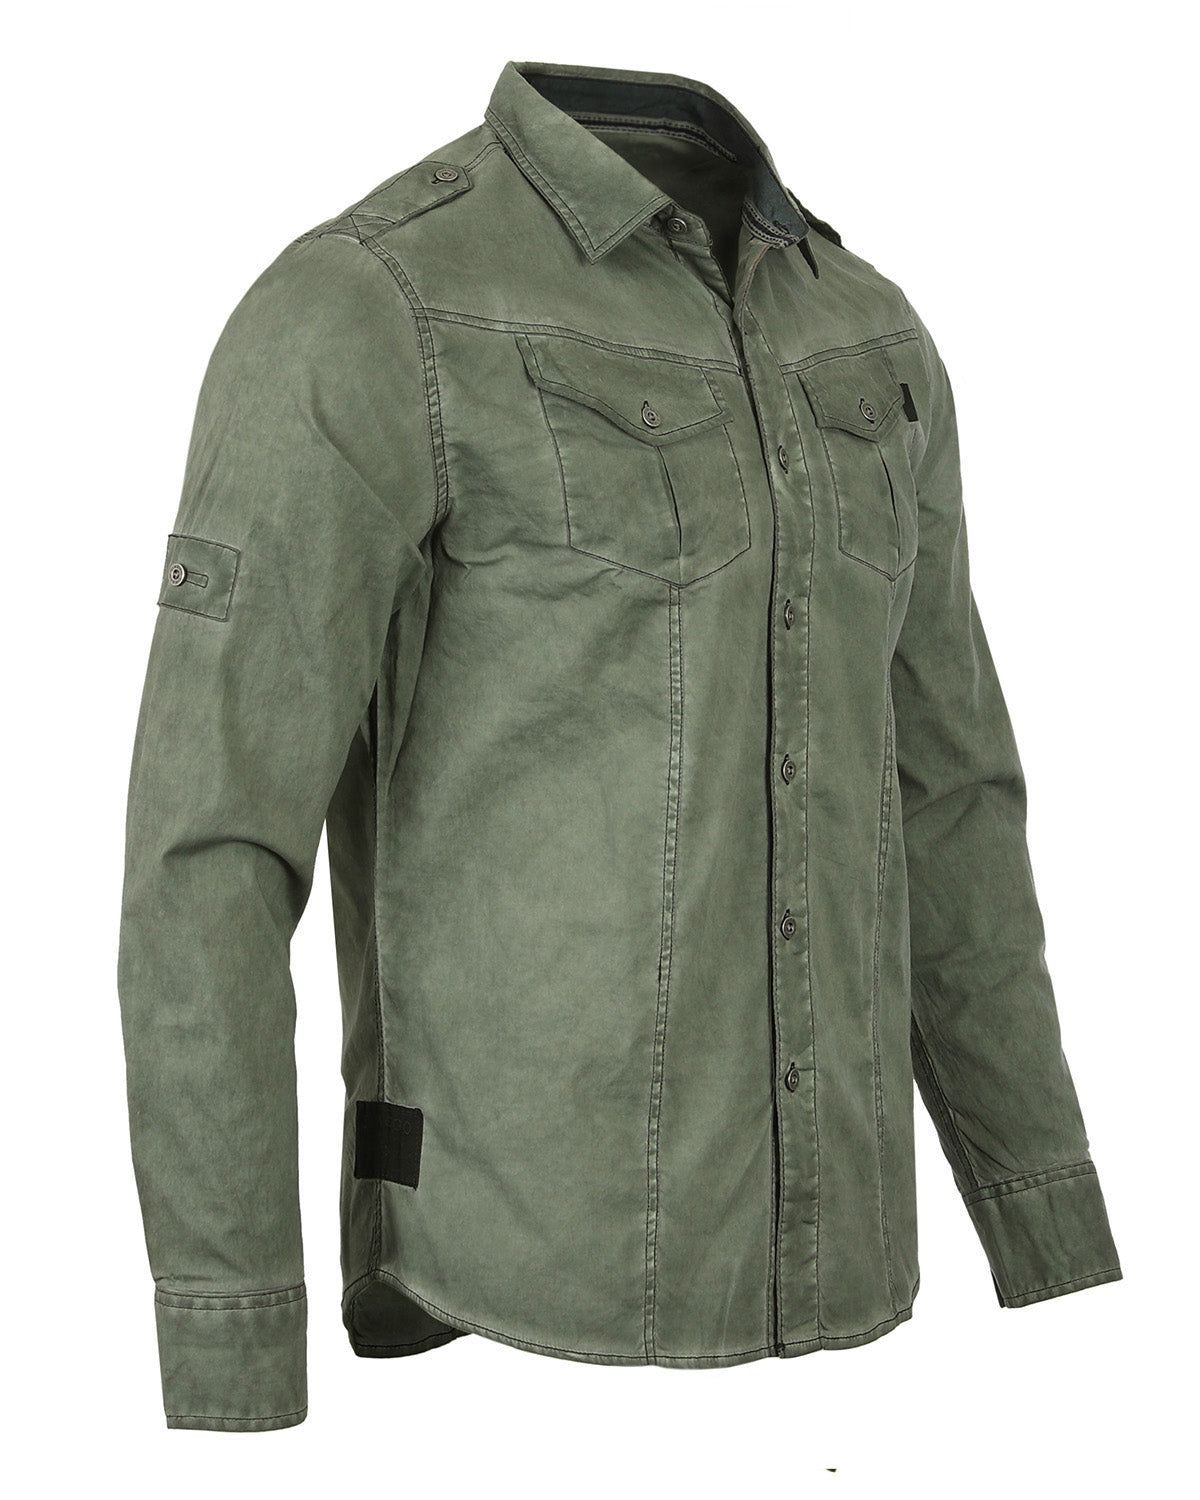 Men's Stretch Roll-Up Sleeve Color Washed Vintage Rugged Button Shirt Army Green